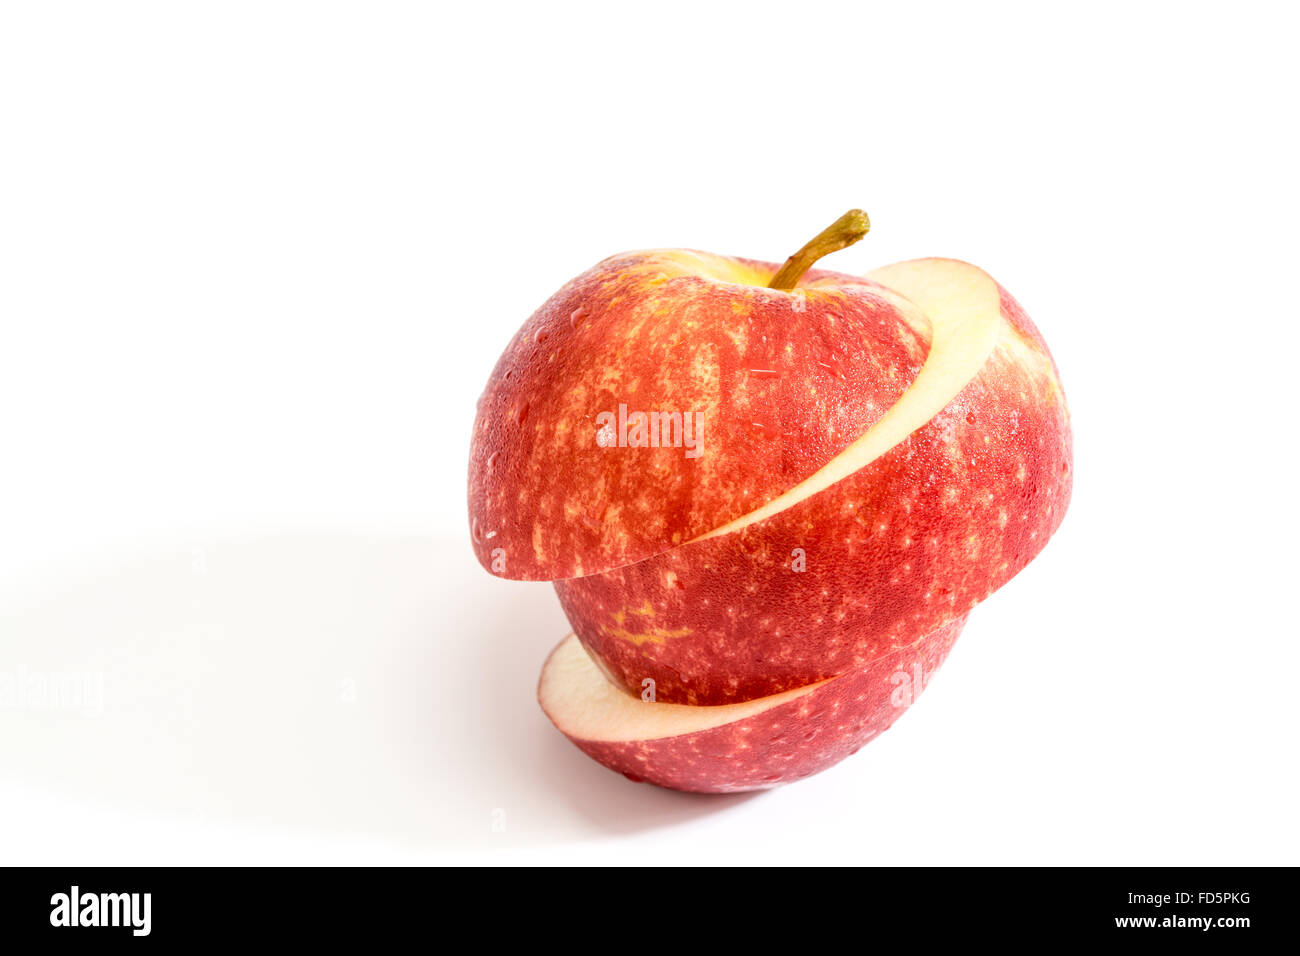 Red apple on white background. Stock Photo